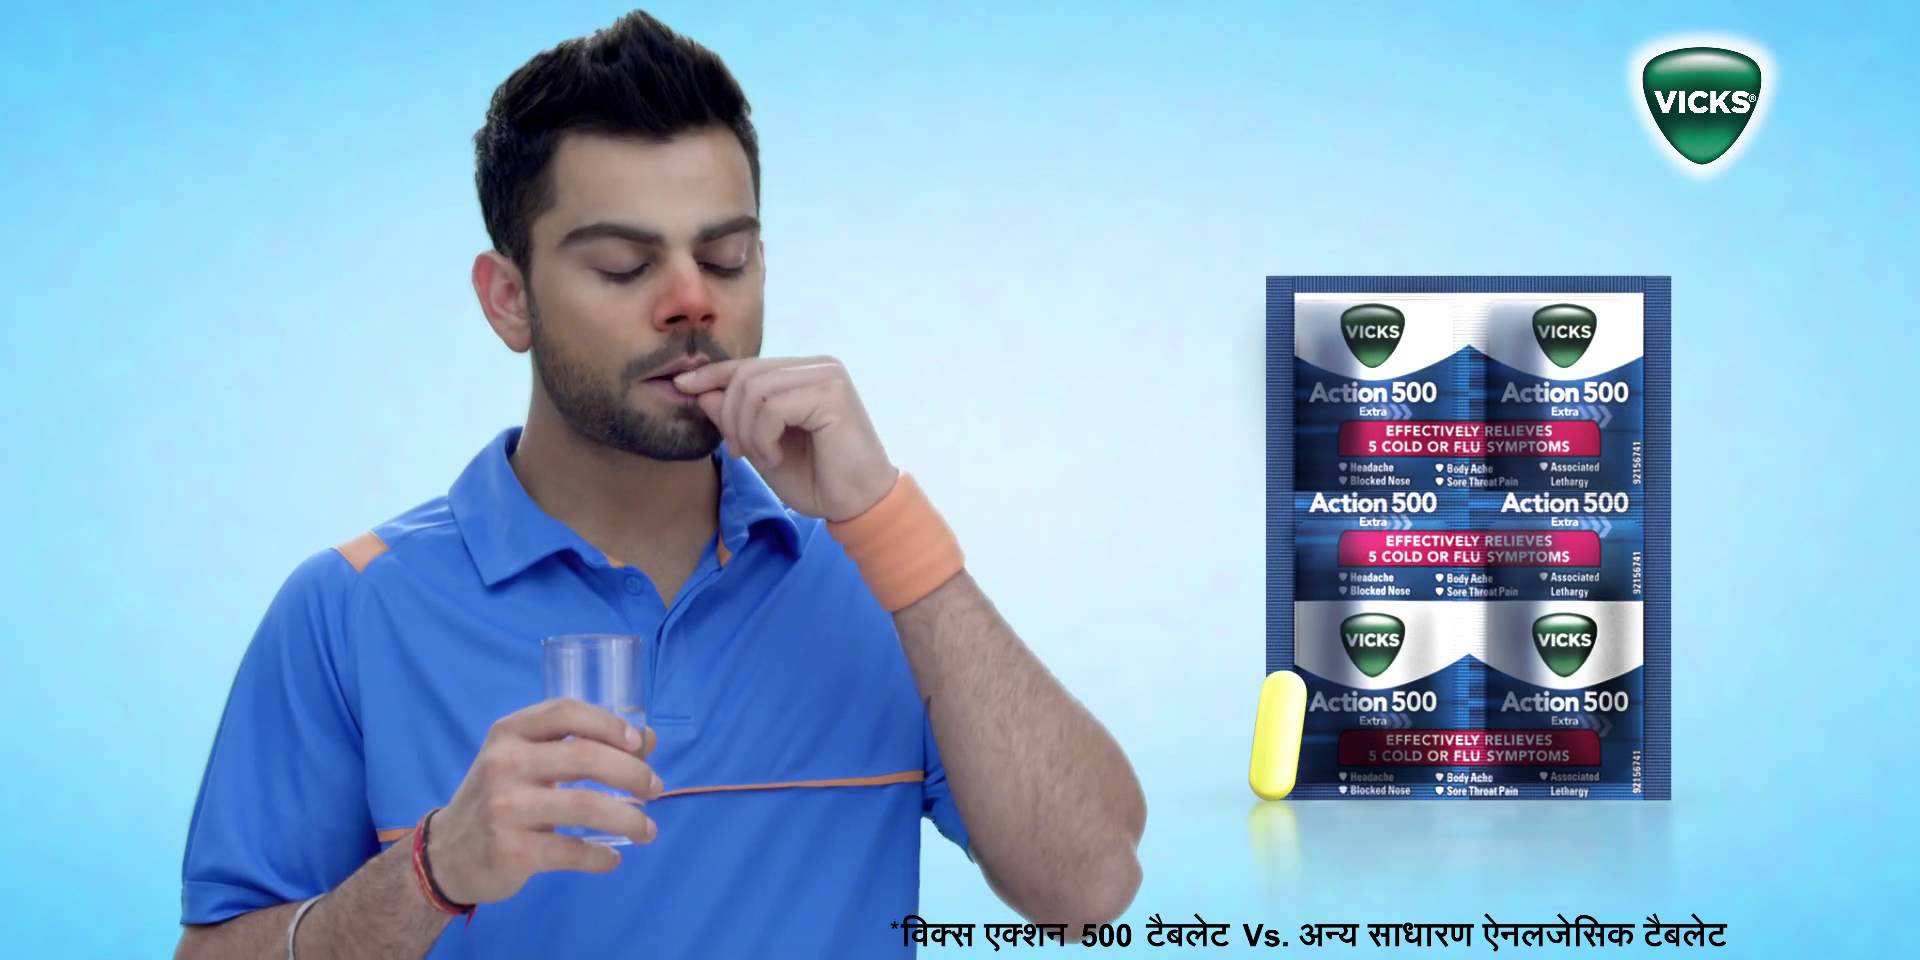 Now, Vicks Action 500 Extra Banned In India With Immediate Effect